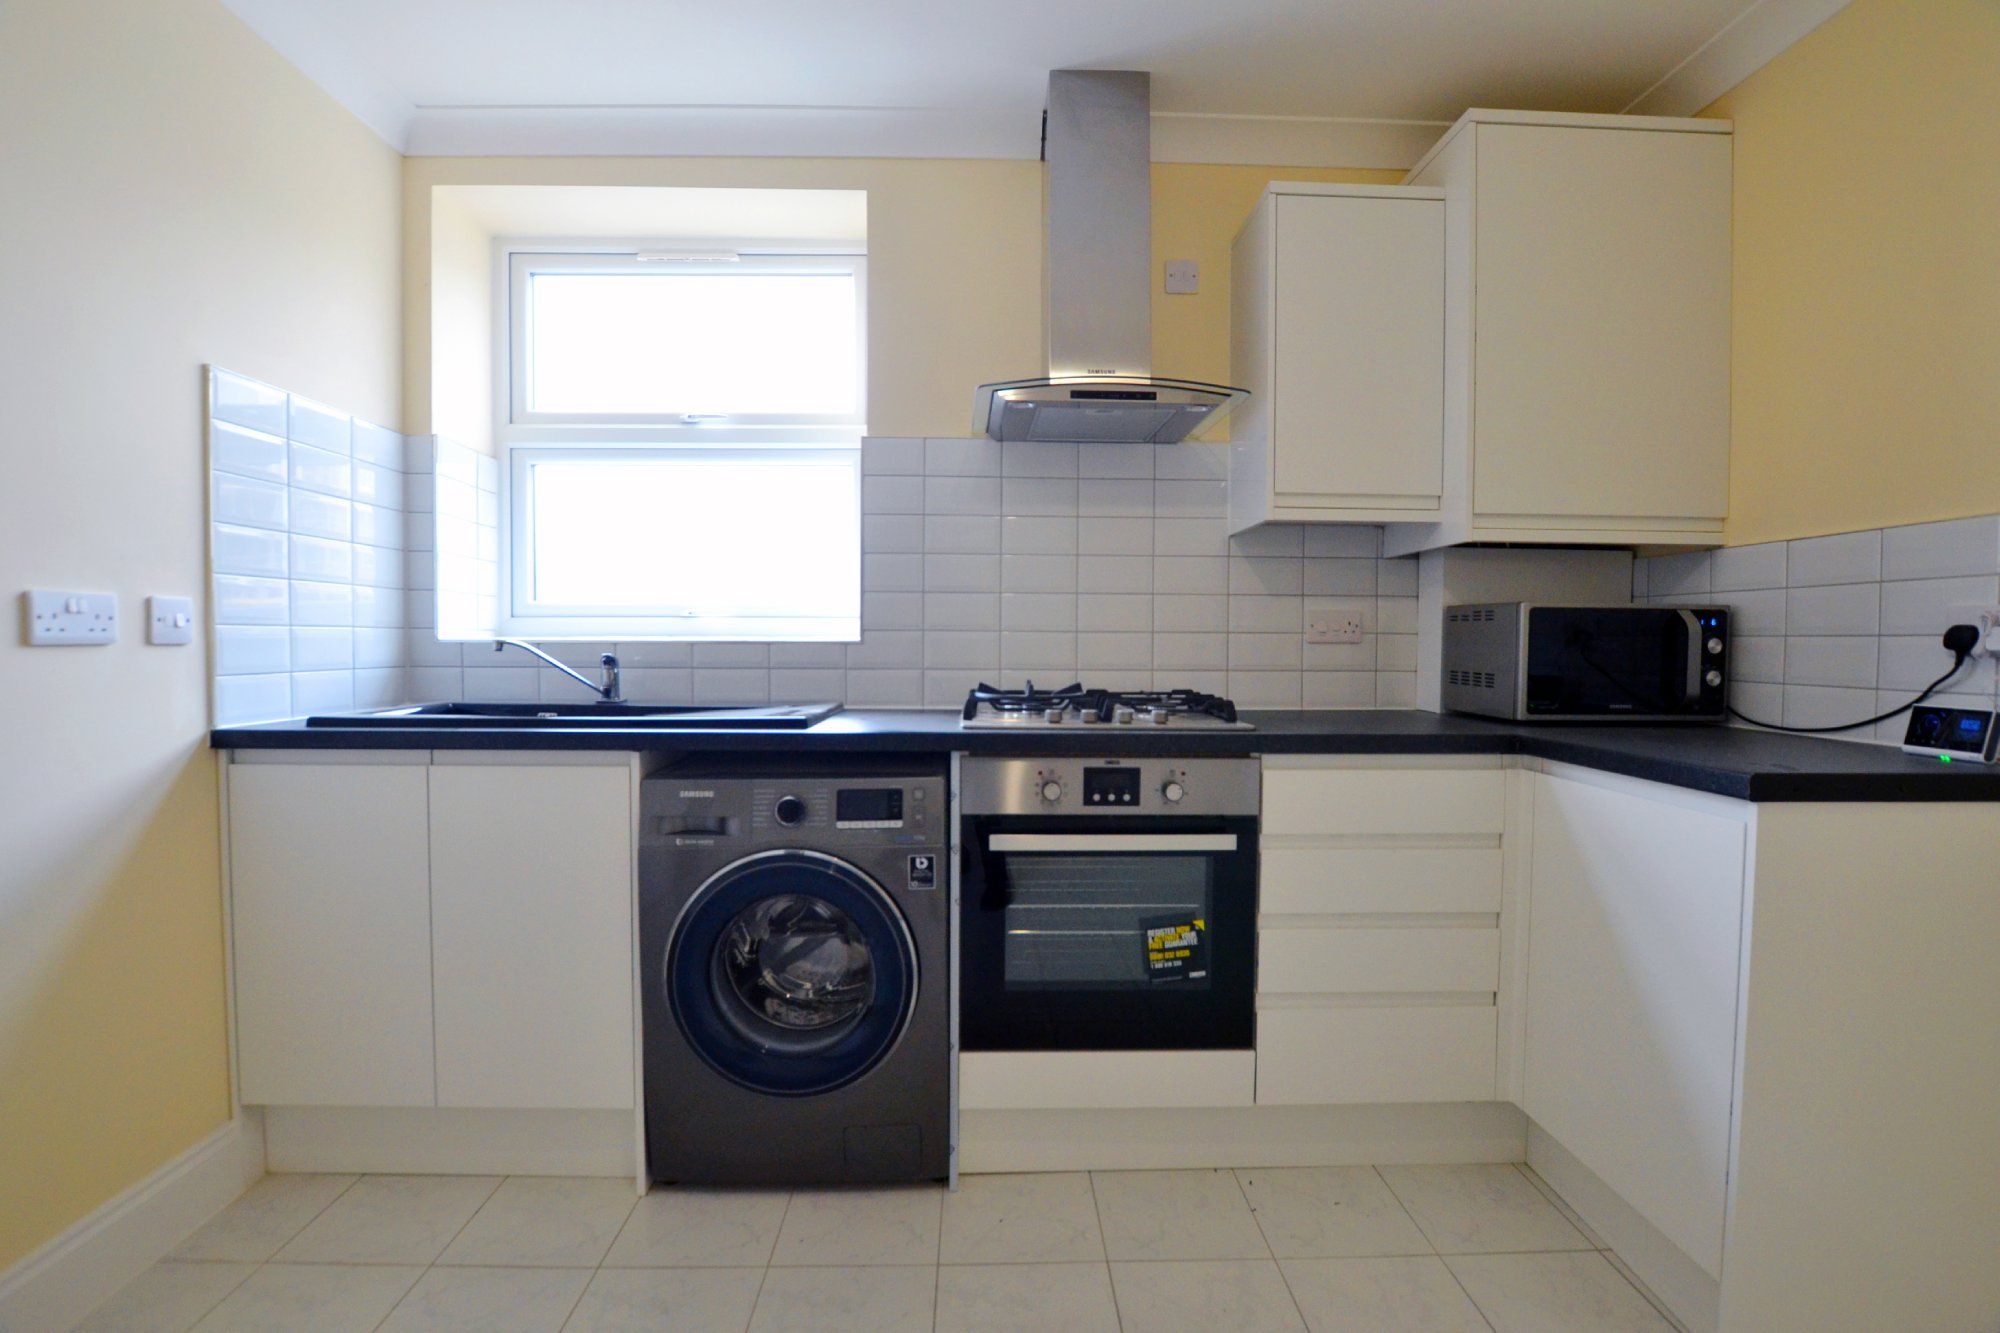 1 Bedroom Flat To Rent Staines Road Hounslow Tw Tw3 3hp